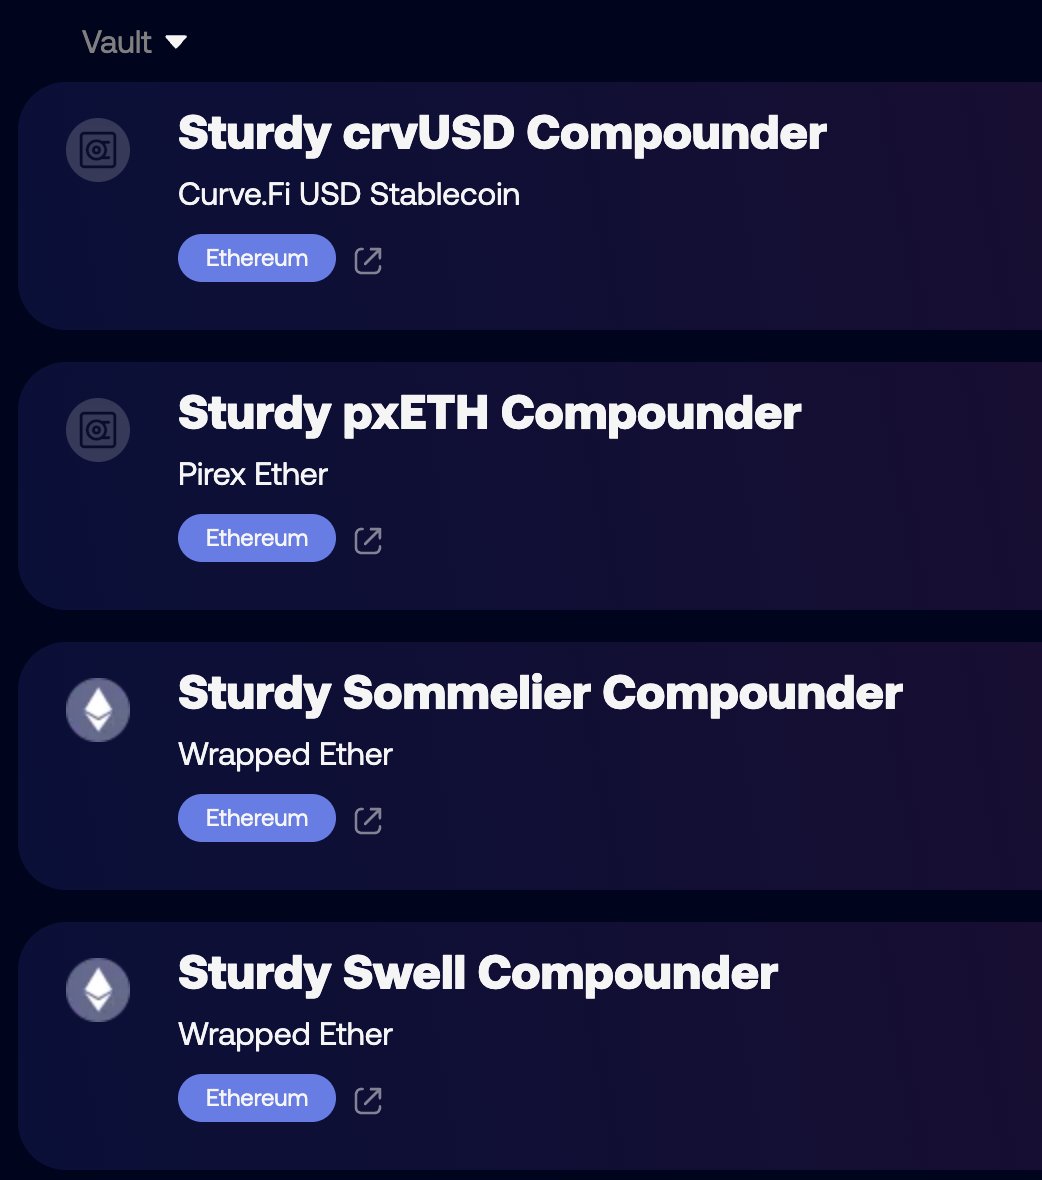 Sturdy's aggregators are now on @yearnfi 🧱 Yearn users can now gain exposure to Sturdy's @CurveFinance, @redactedcartel, @swellnetworkio, and @sommfinance aggregators in one click to earn up to 40% APR Head over to Yearn's V3 vault UI to ape in!